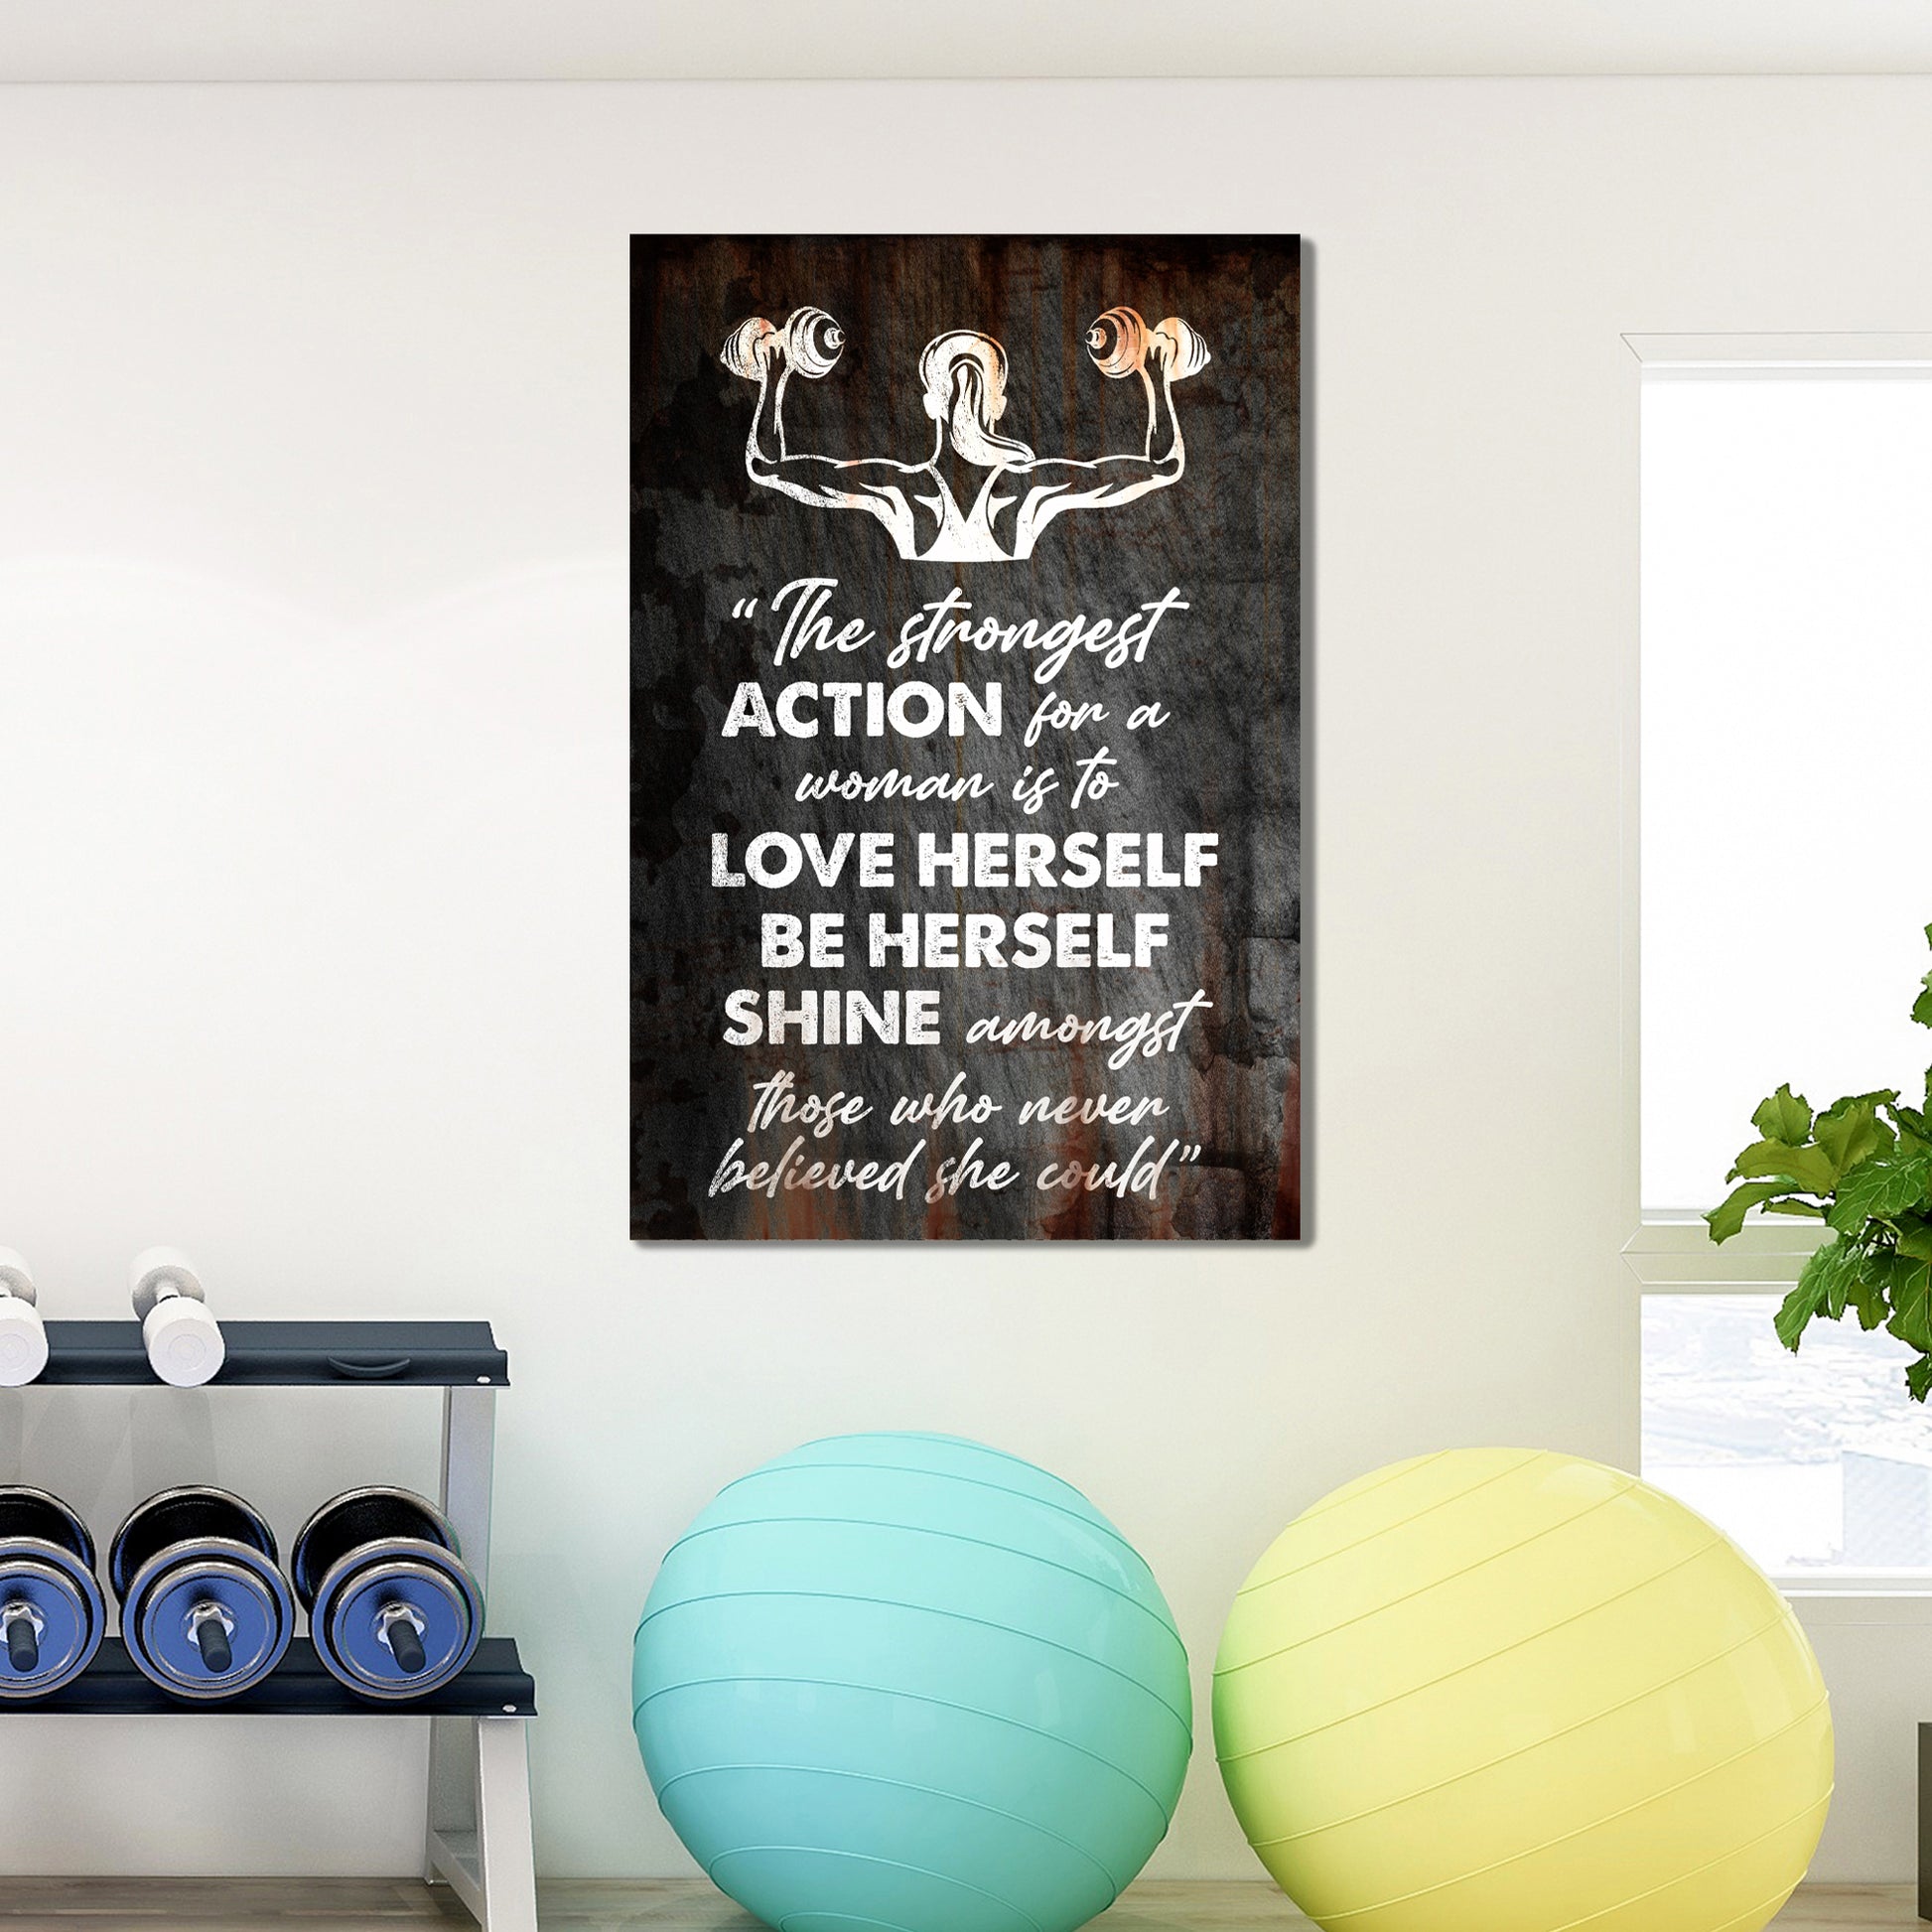 The Strongest Actions For A Woman Sign - Image by Tailored Canvases